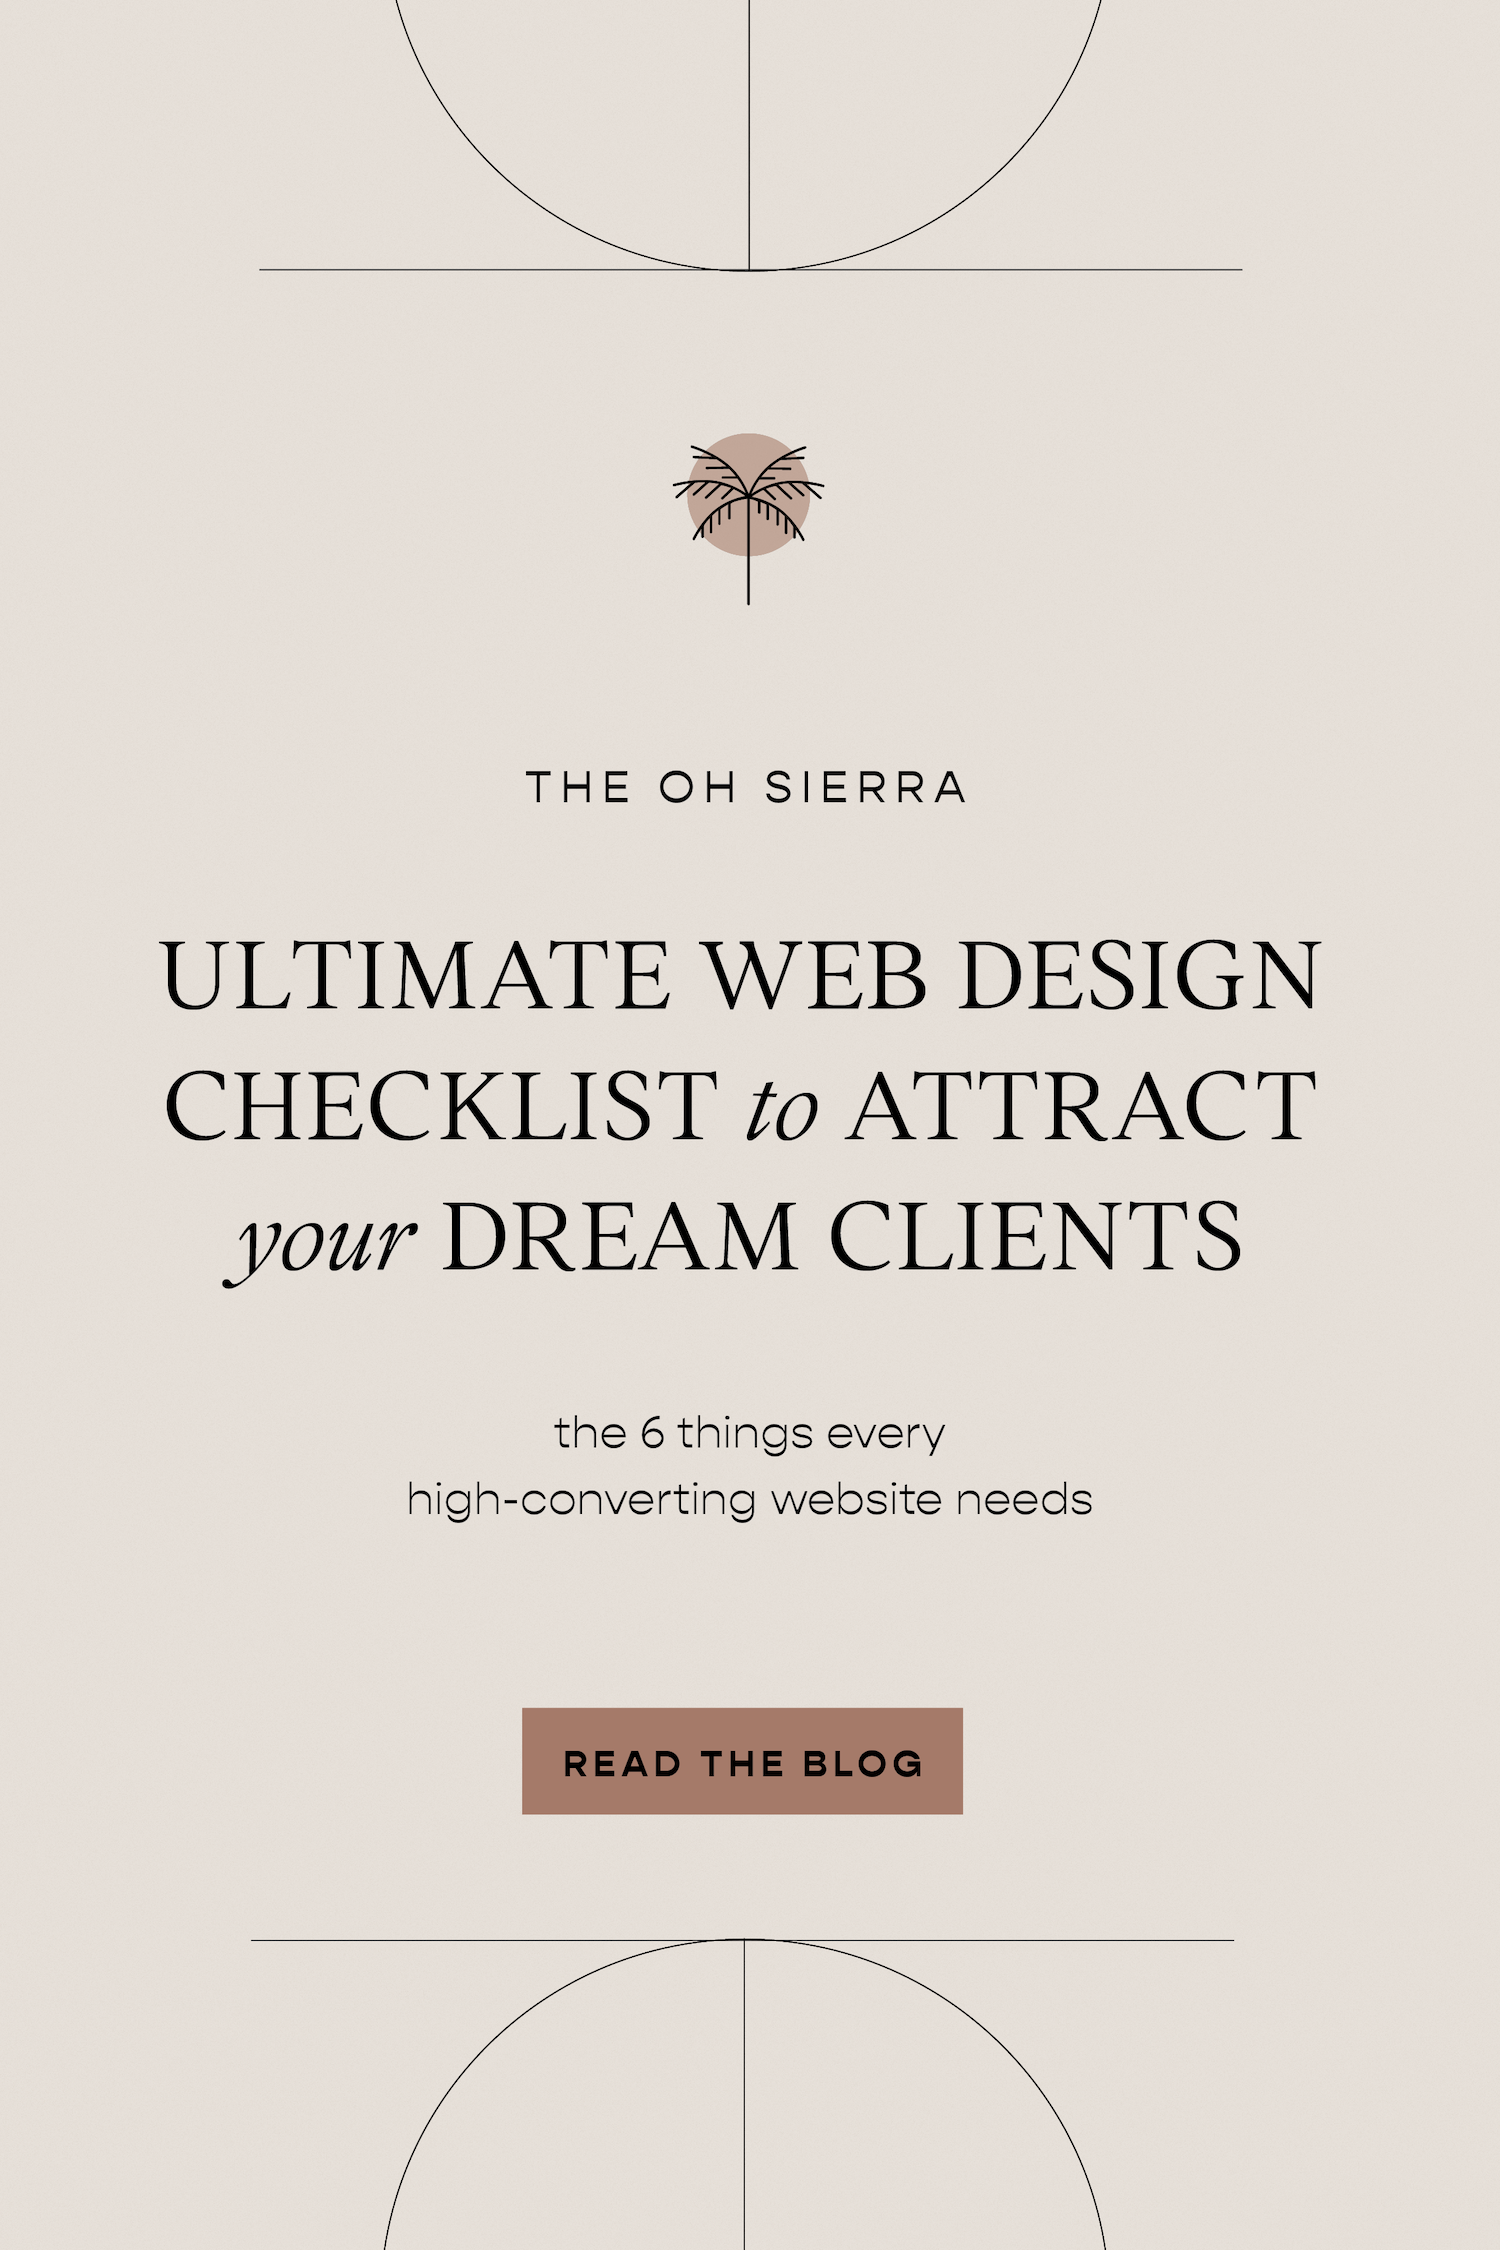 View Our Web Design Checklist for Converting Your Dream Clients. Website Resources for Entrepreneurs. Web Design Tips for Business Owners.